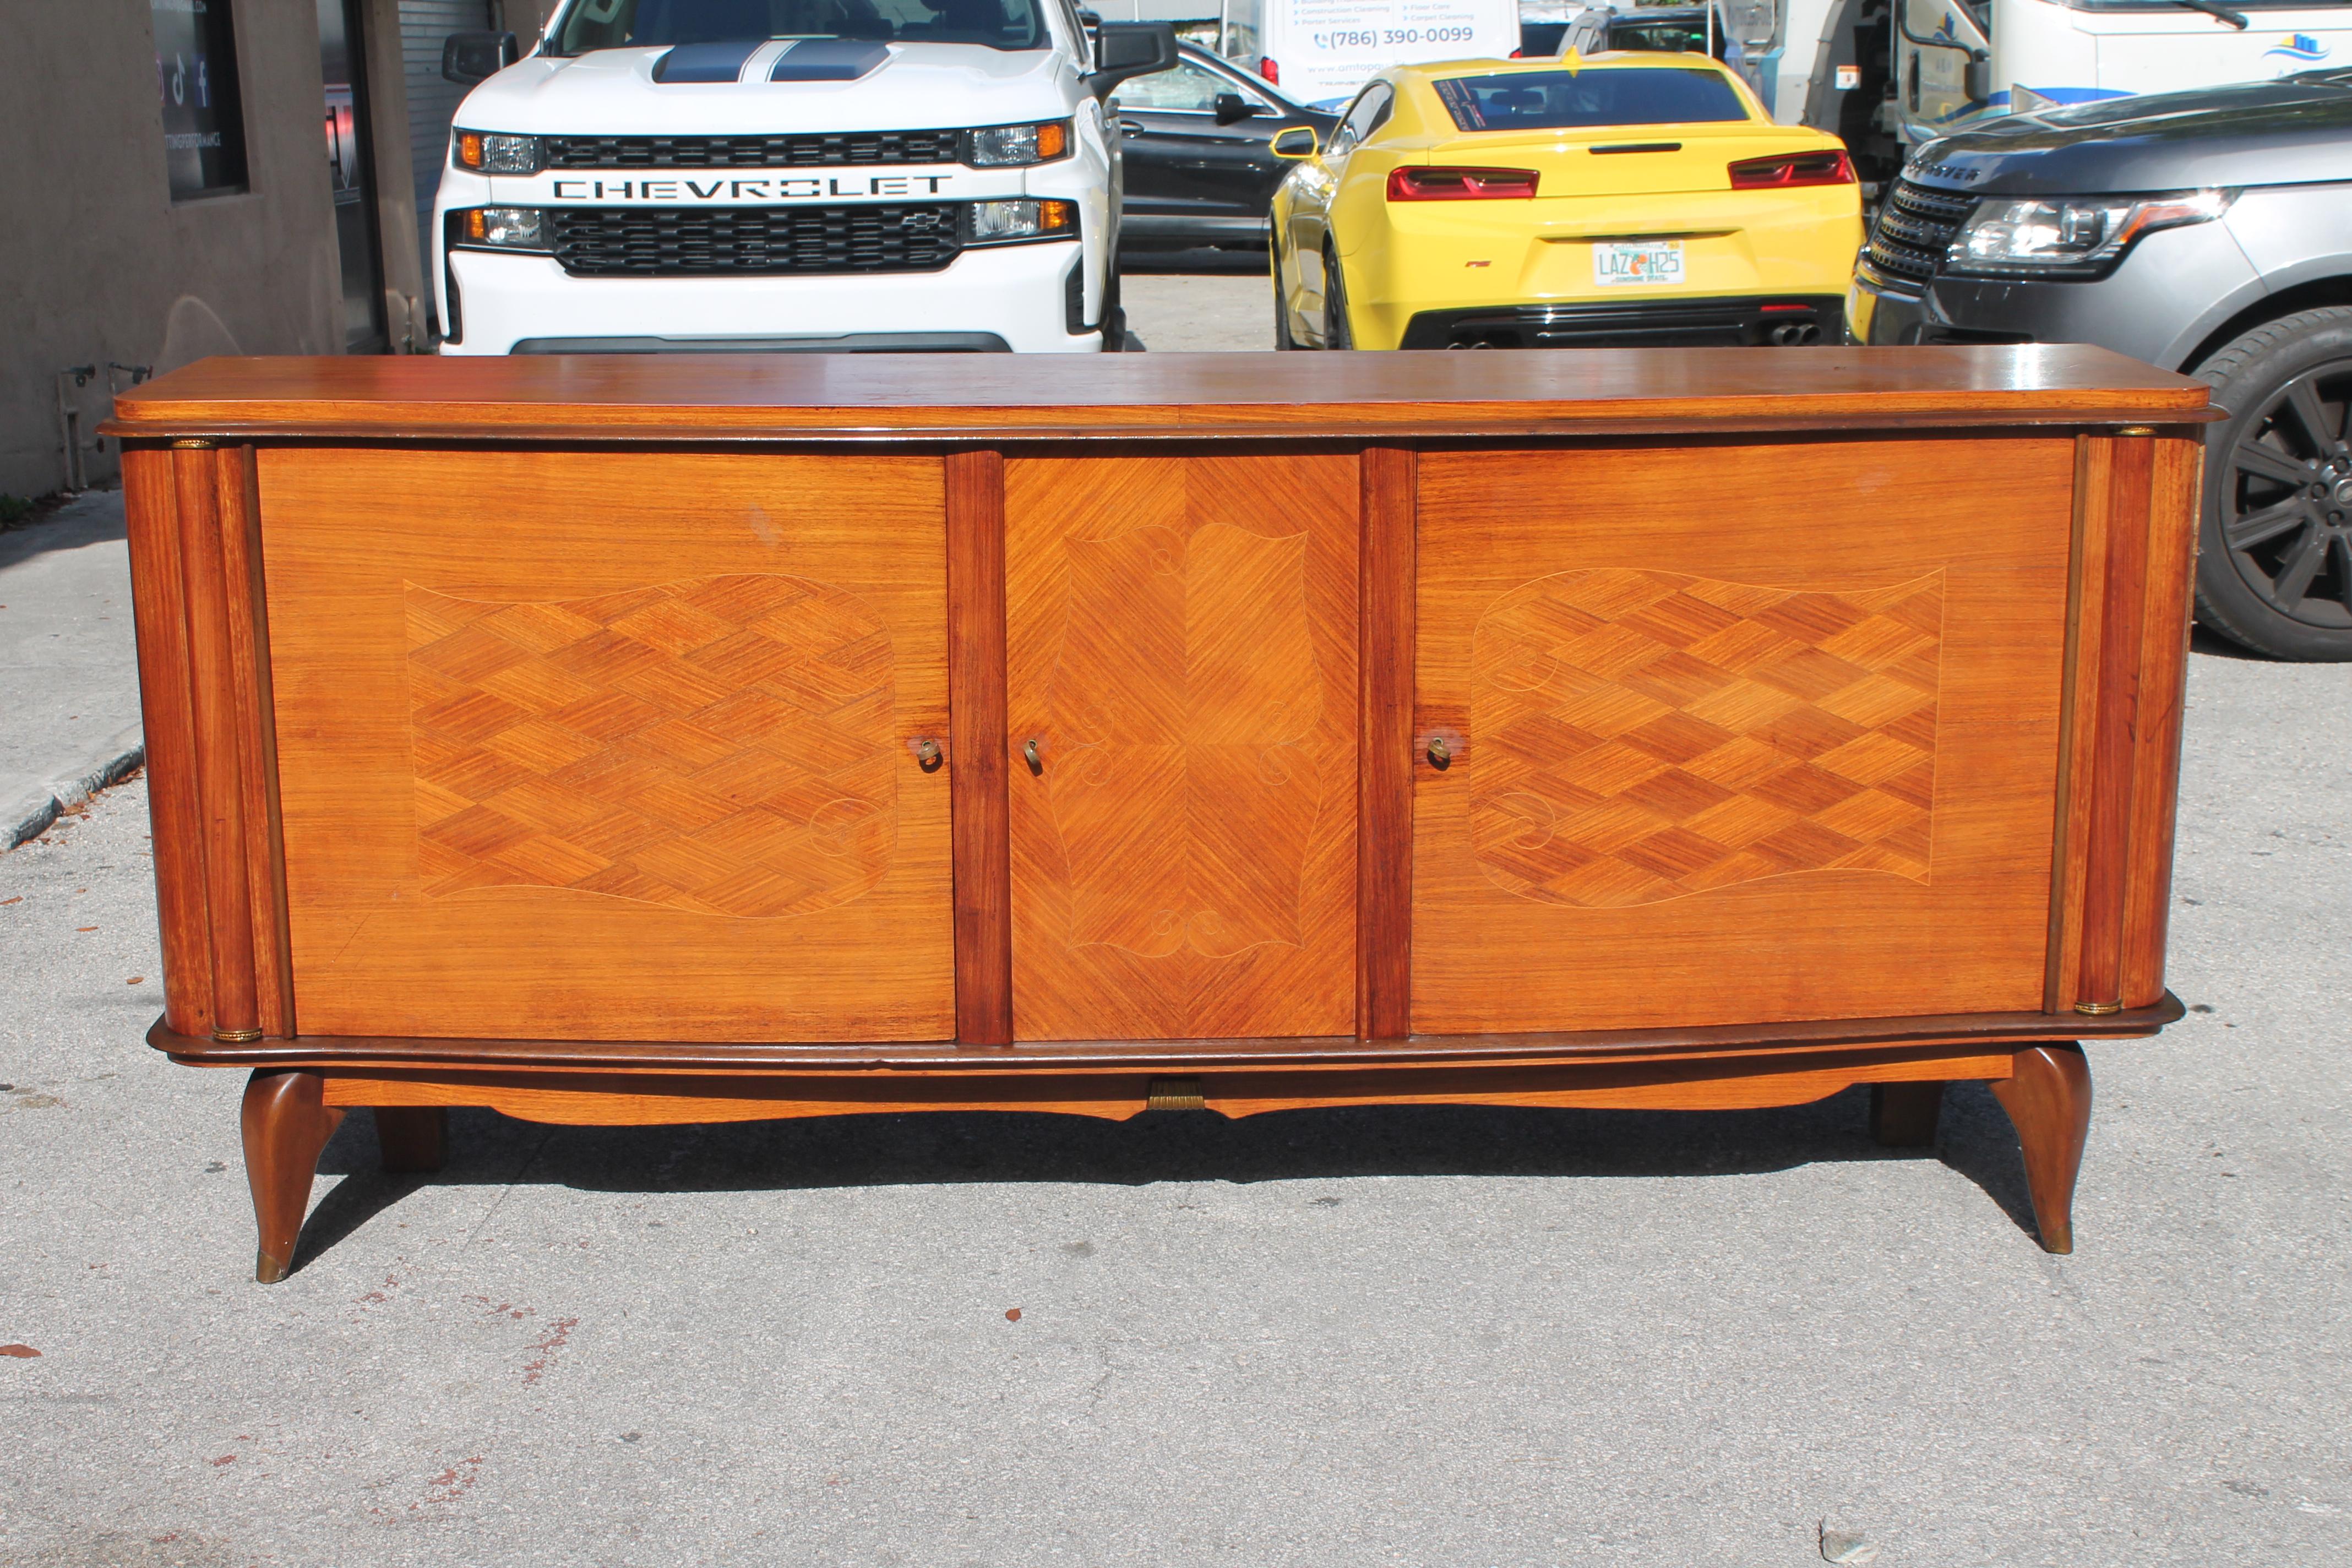 Classic 1940's French Art Deco Rosewood Grand Buffet/ Sideboard/ Credenza/ Dry Bar. Interior storage area finished in Sycamore.  Parisian Estate find.